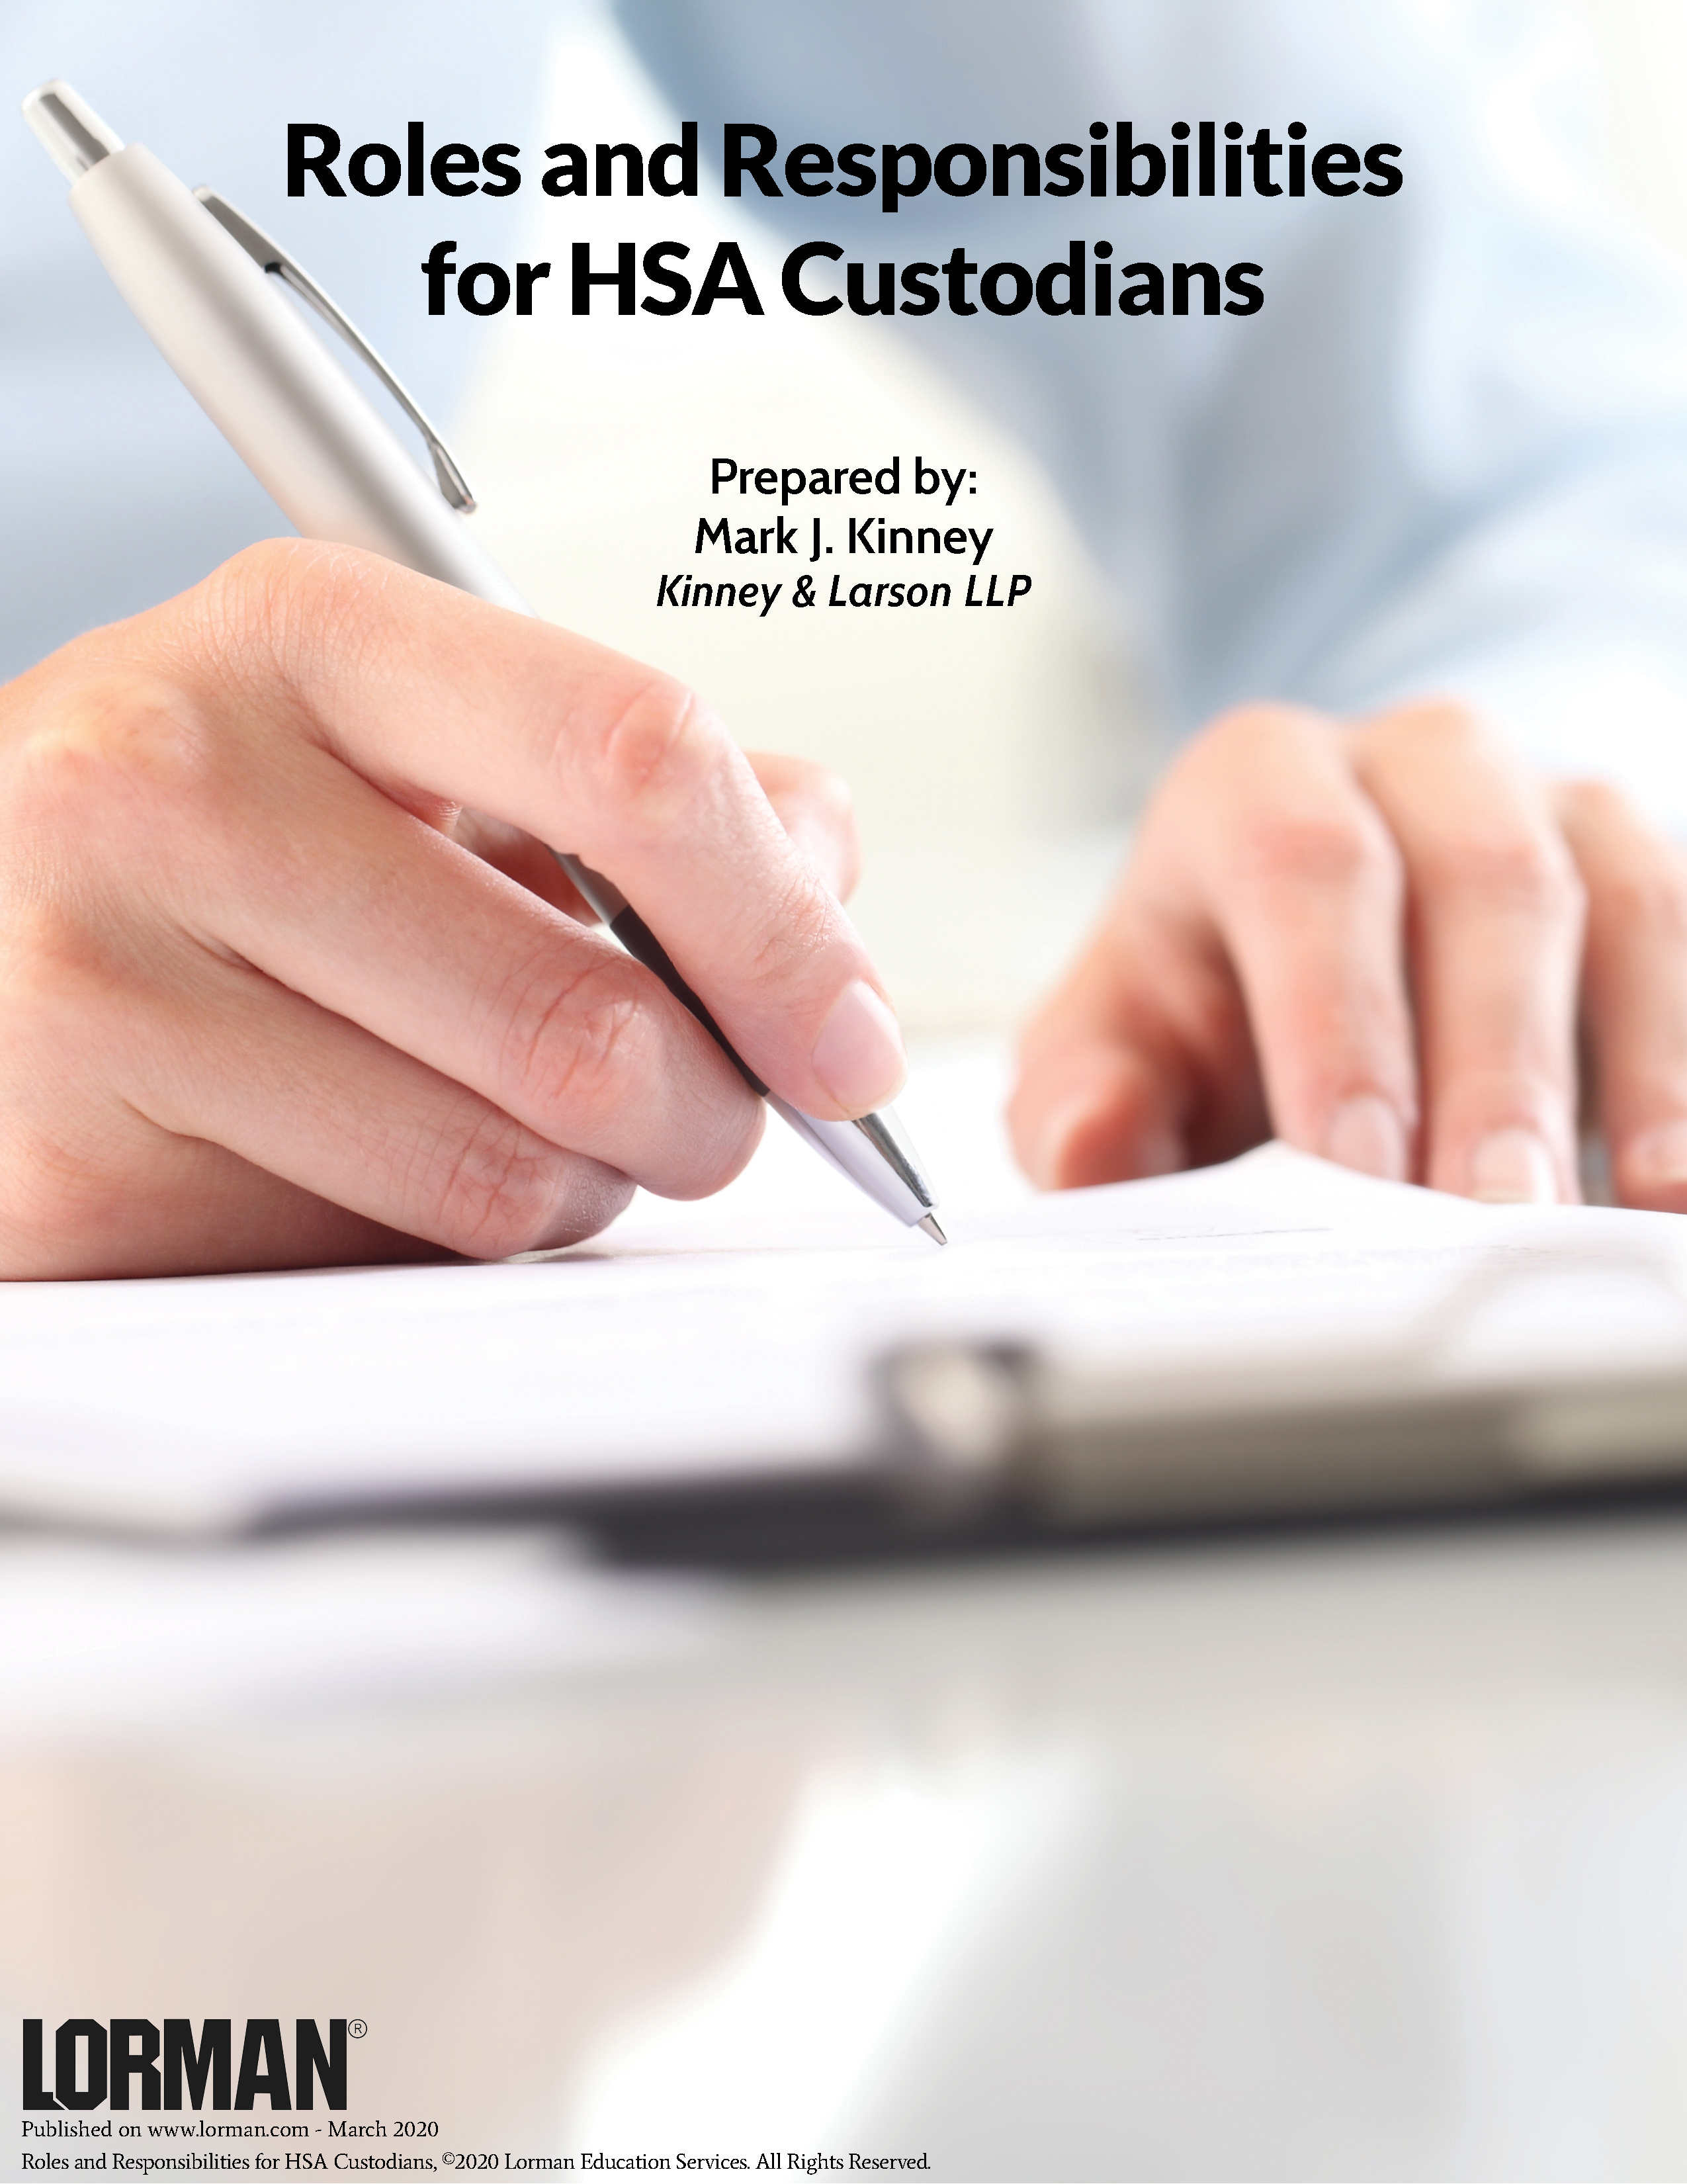 Roles and Responsibilities for HSA Custodians